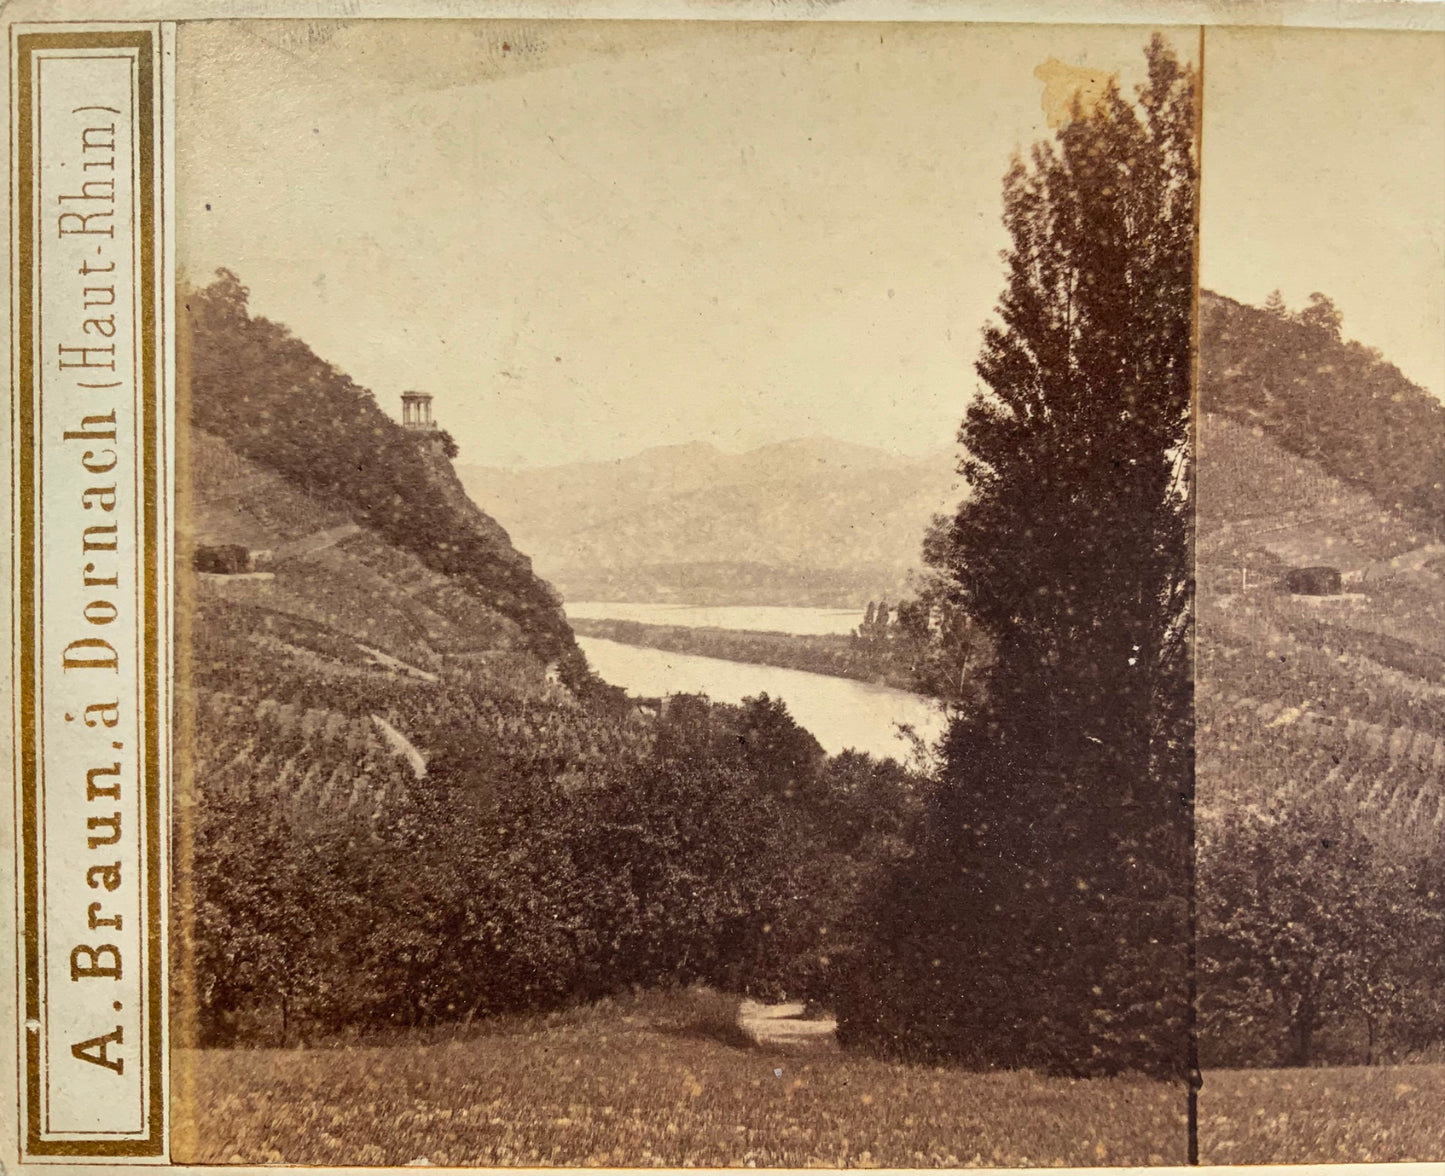 1860s Adolphe Braun, Rolandseck, Germany, stereo photograph